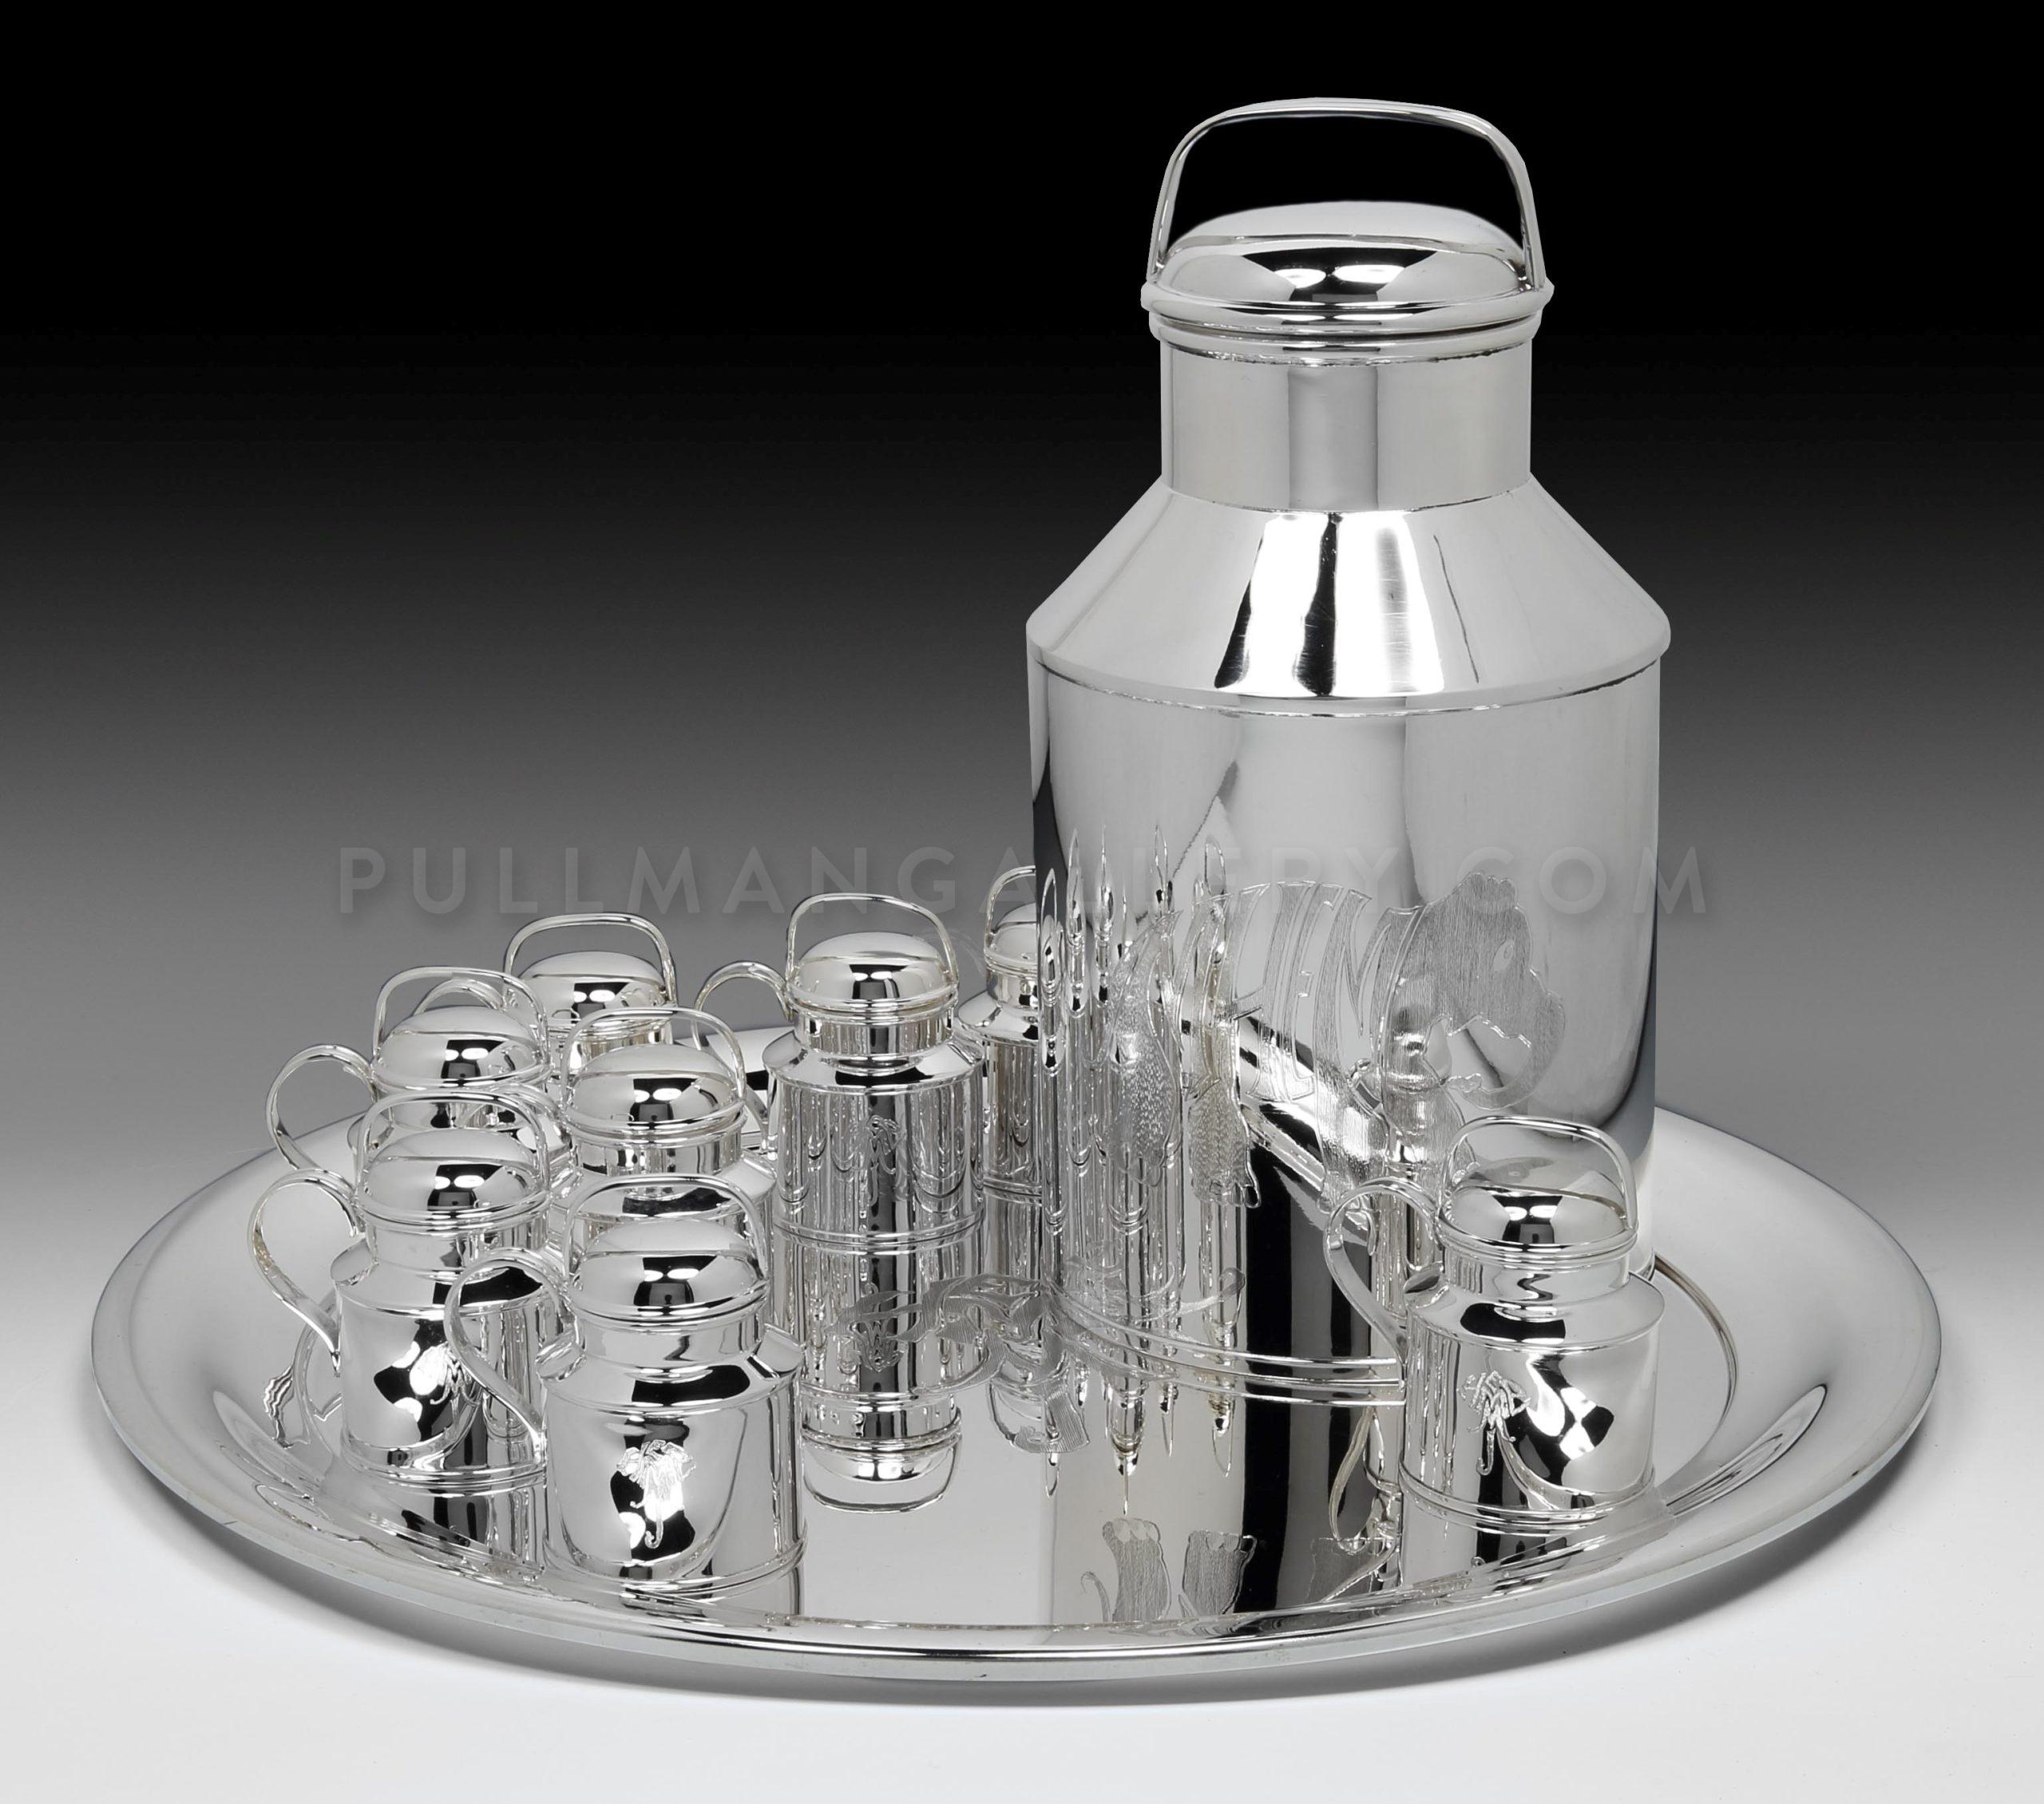 https://pullmangallery.com/app/uploads/2022/02/6901-Tuttle-Silversmiths-Elephant-Cocktail-Set-with-tray-cropped-scaled.jpg?v=1647342829